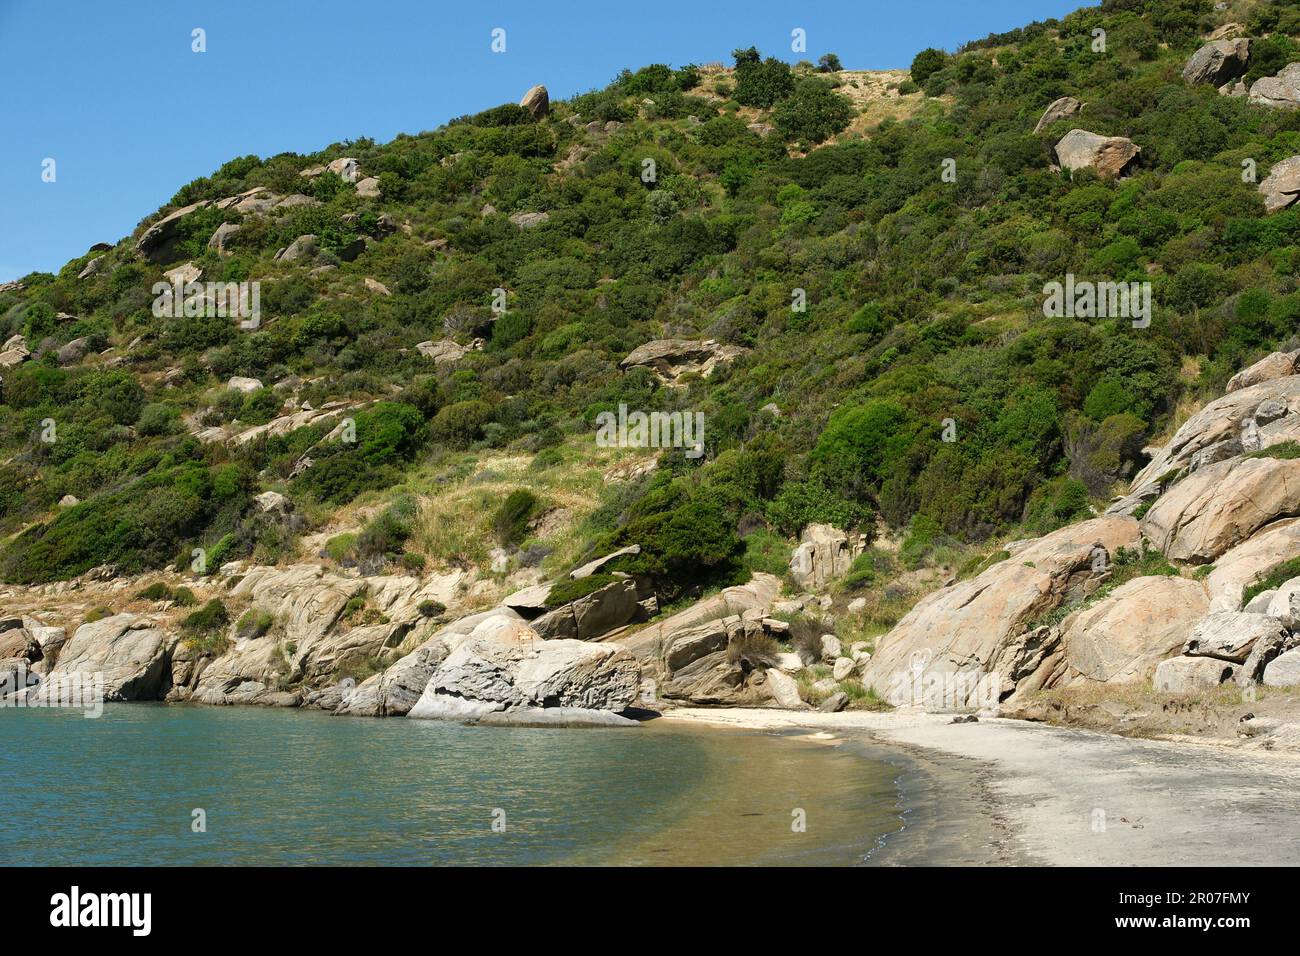 Located in Balikesir, Turkey, the Kapidag Peninsula is an important place for summer holidays. Stock Photo